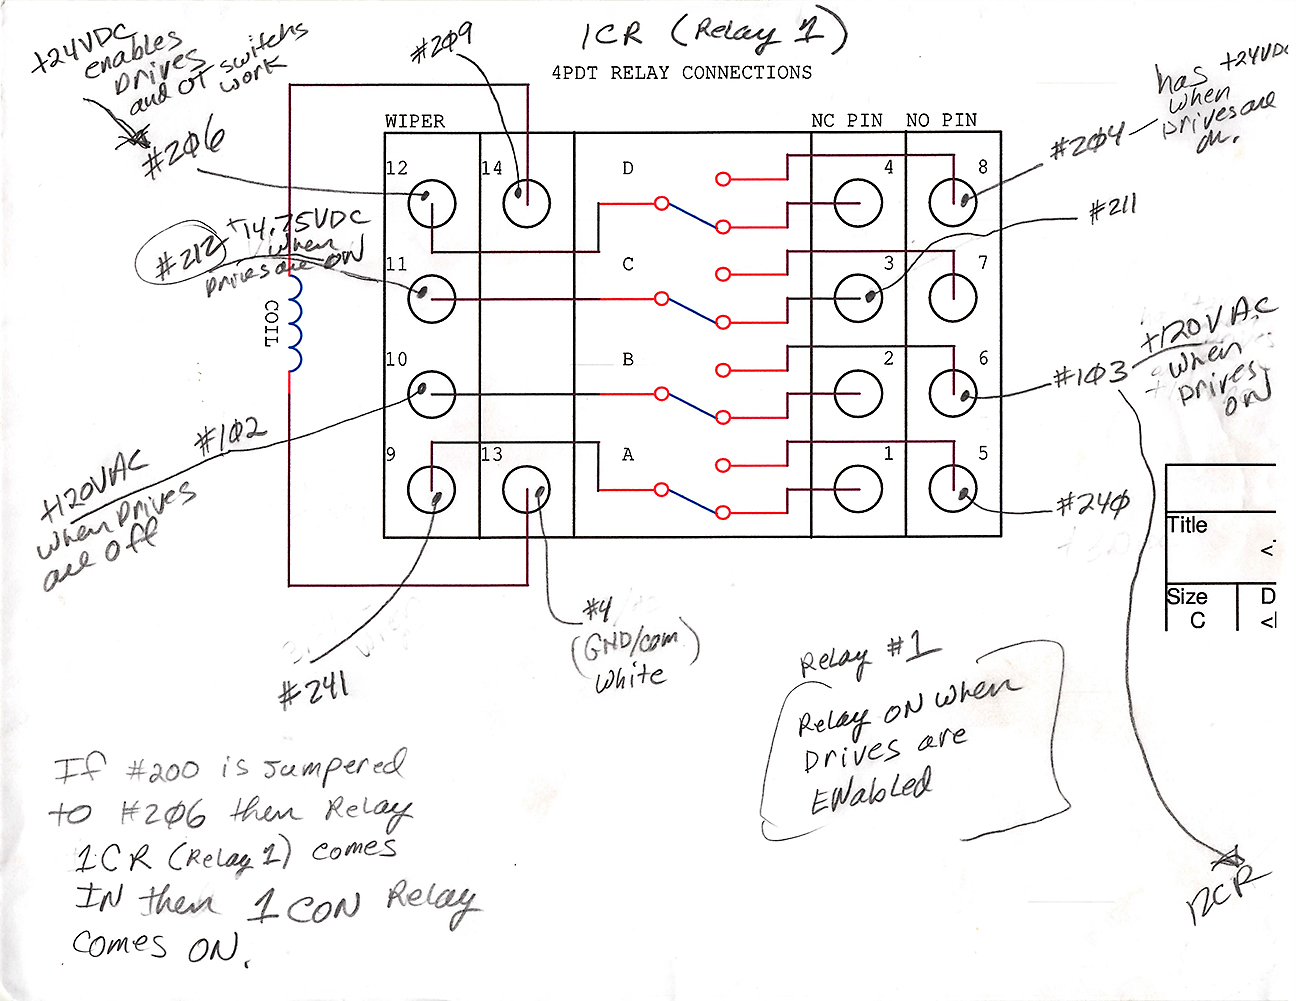 1CRE Relay Wires